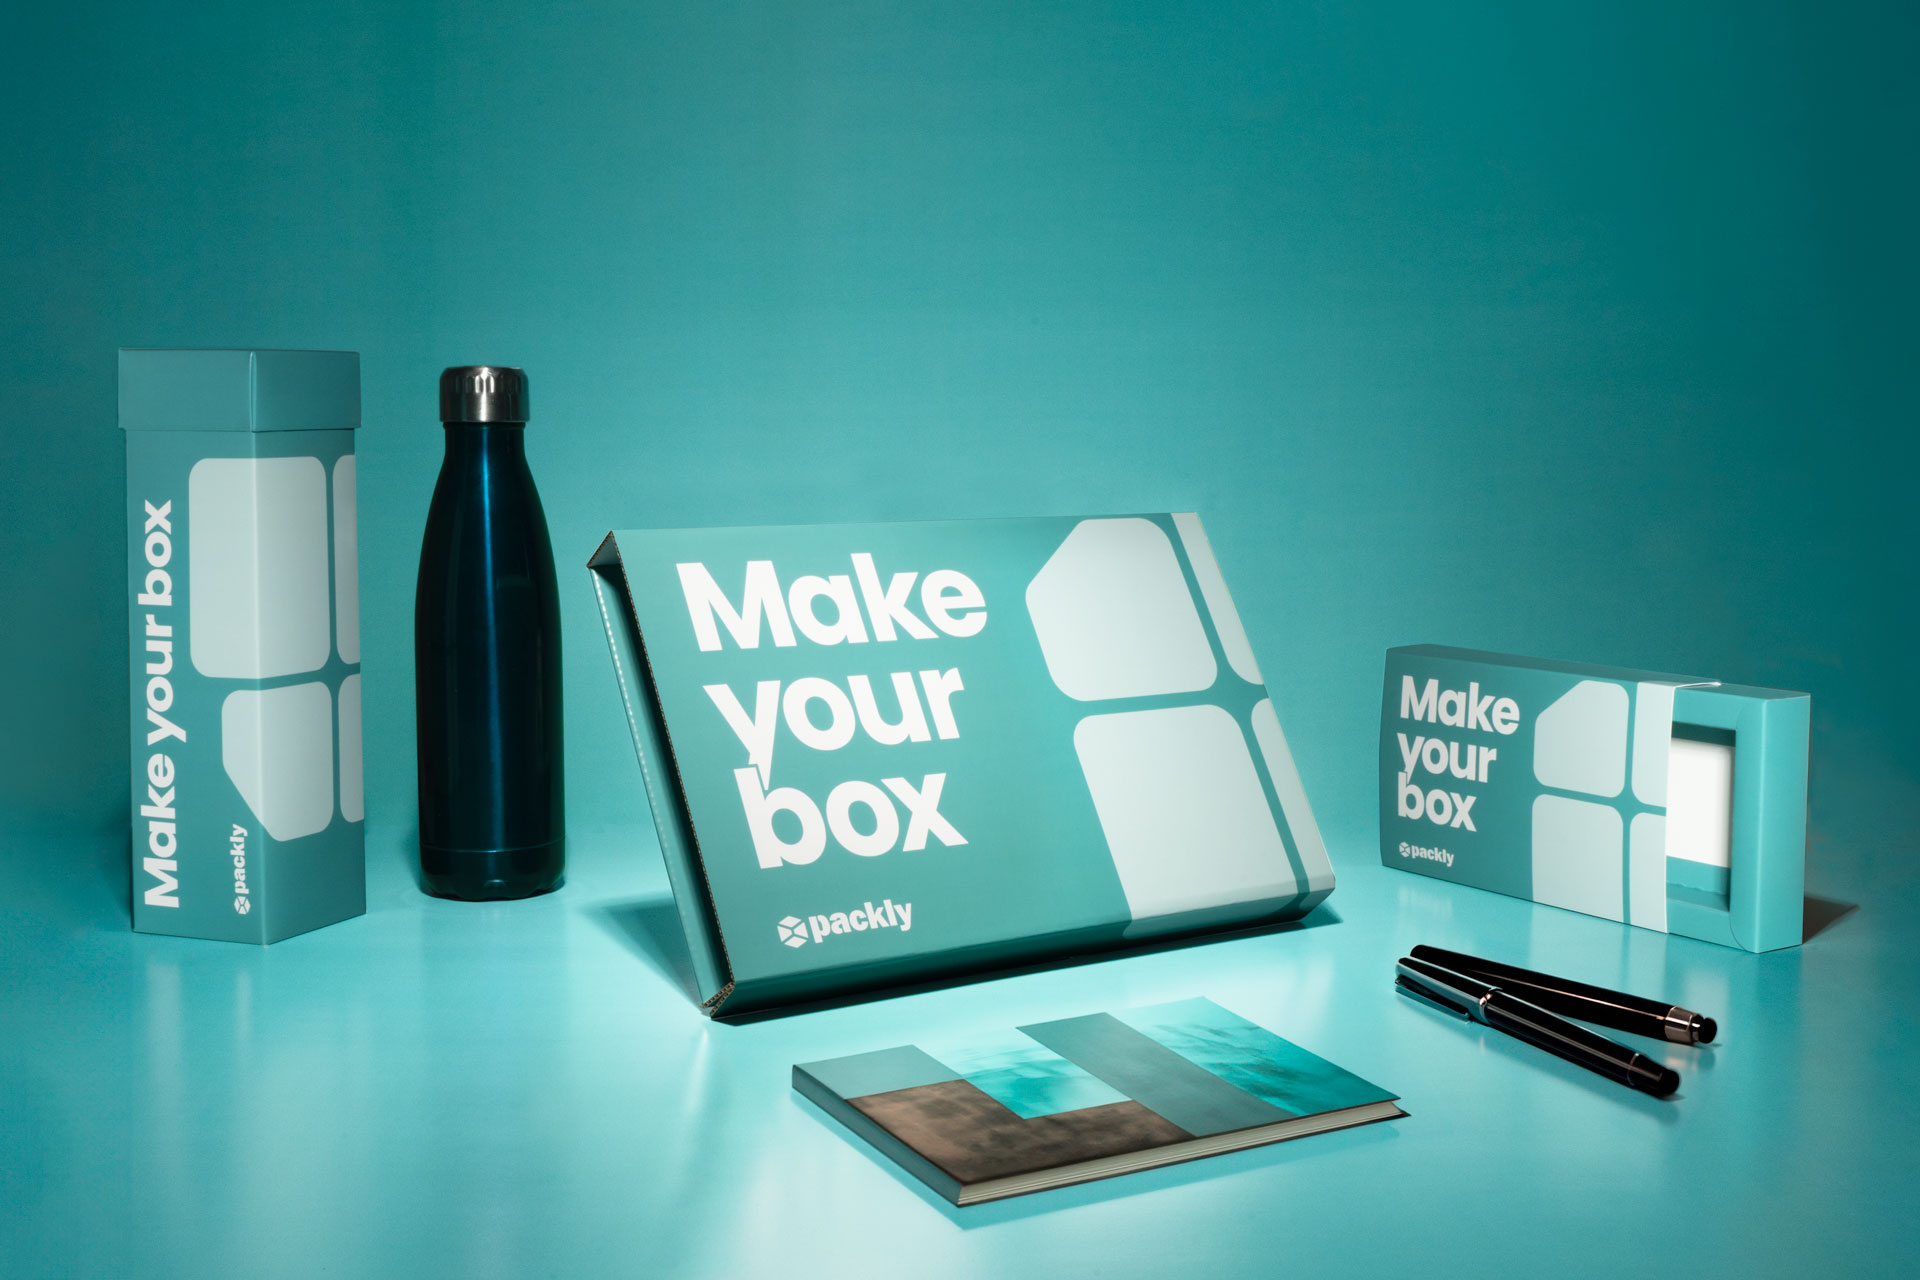 Packaging for Marketing